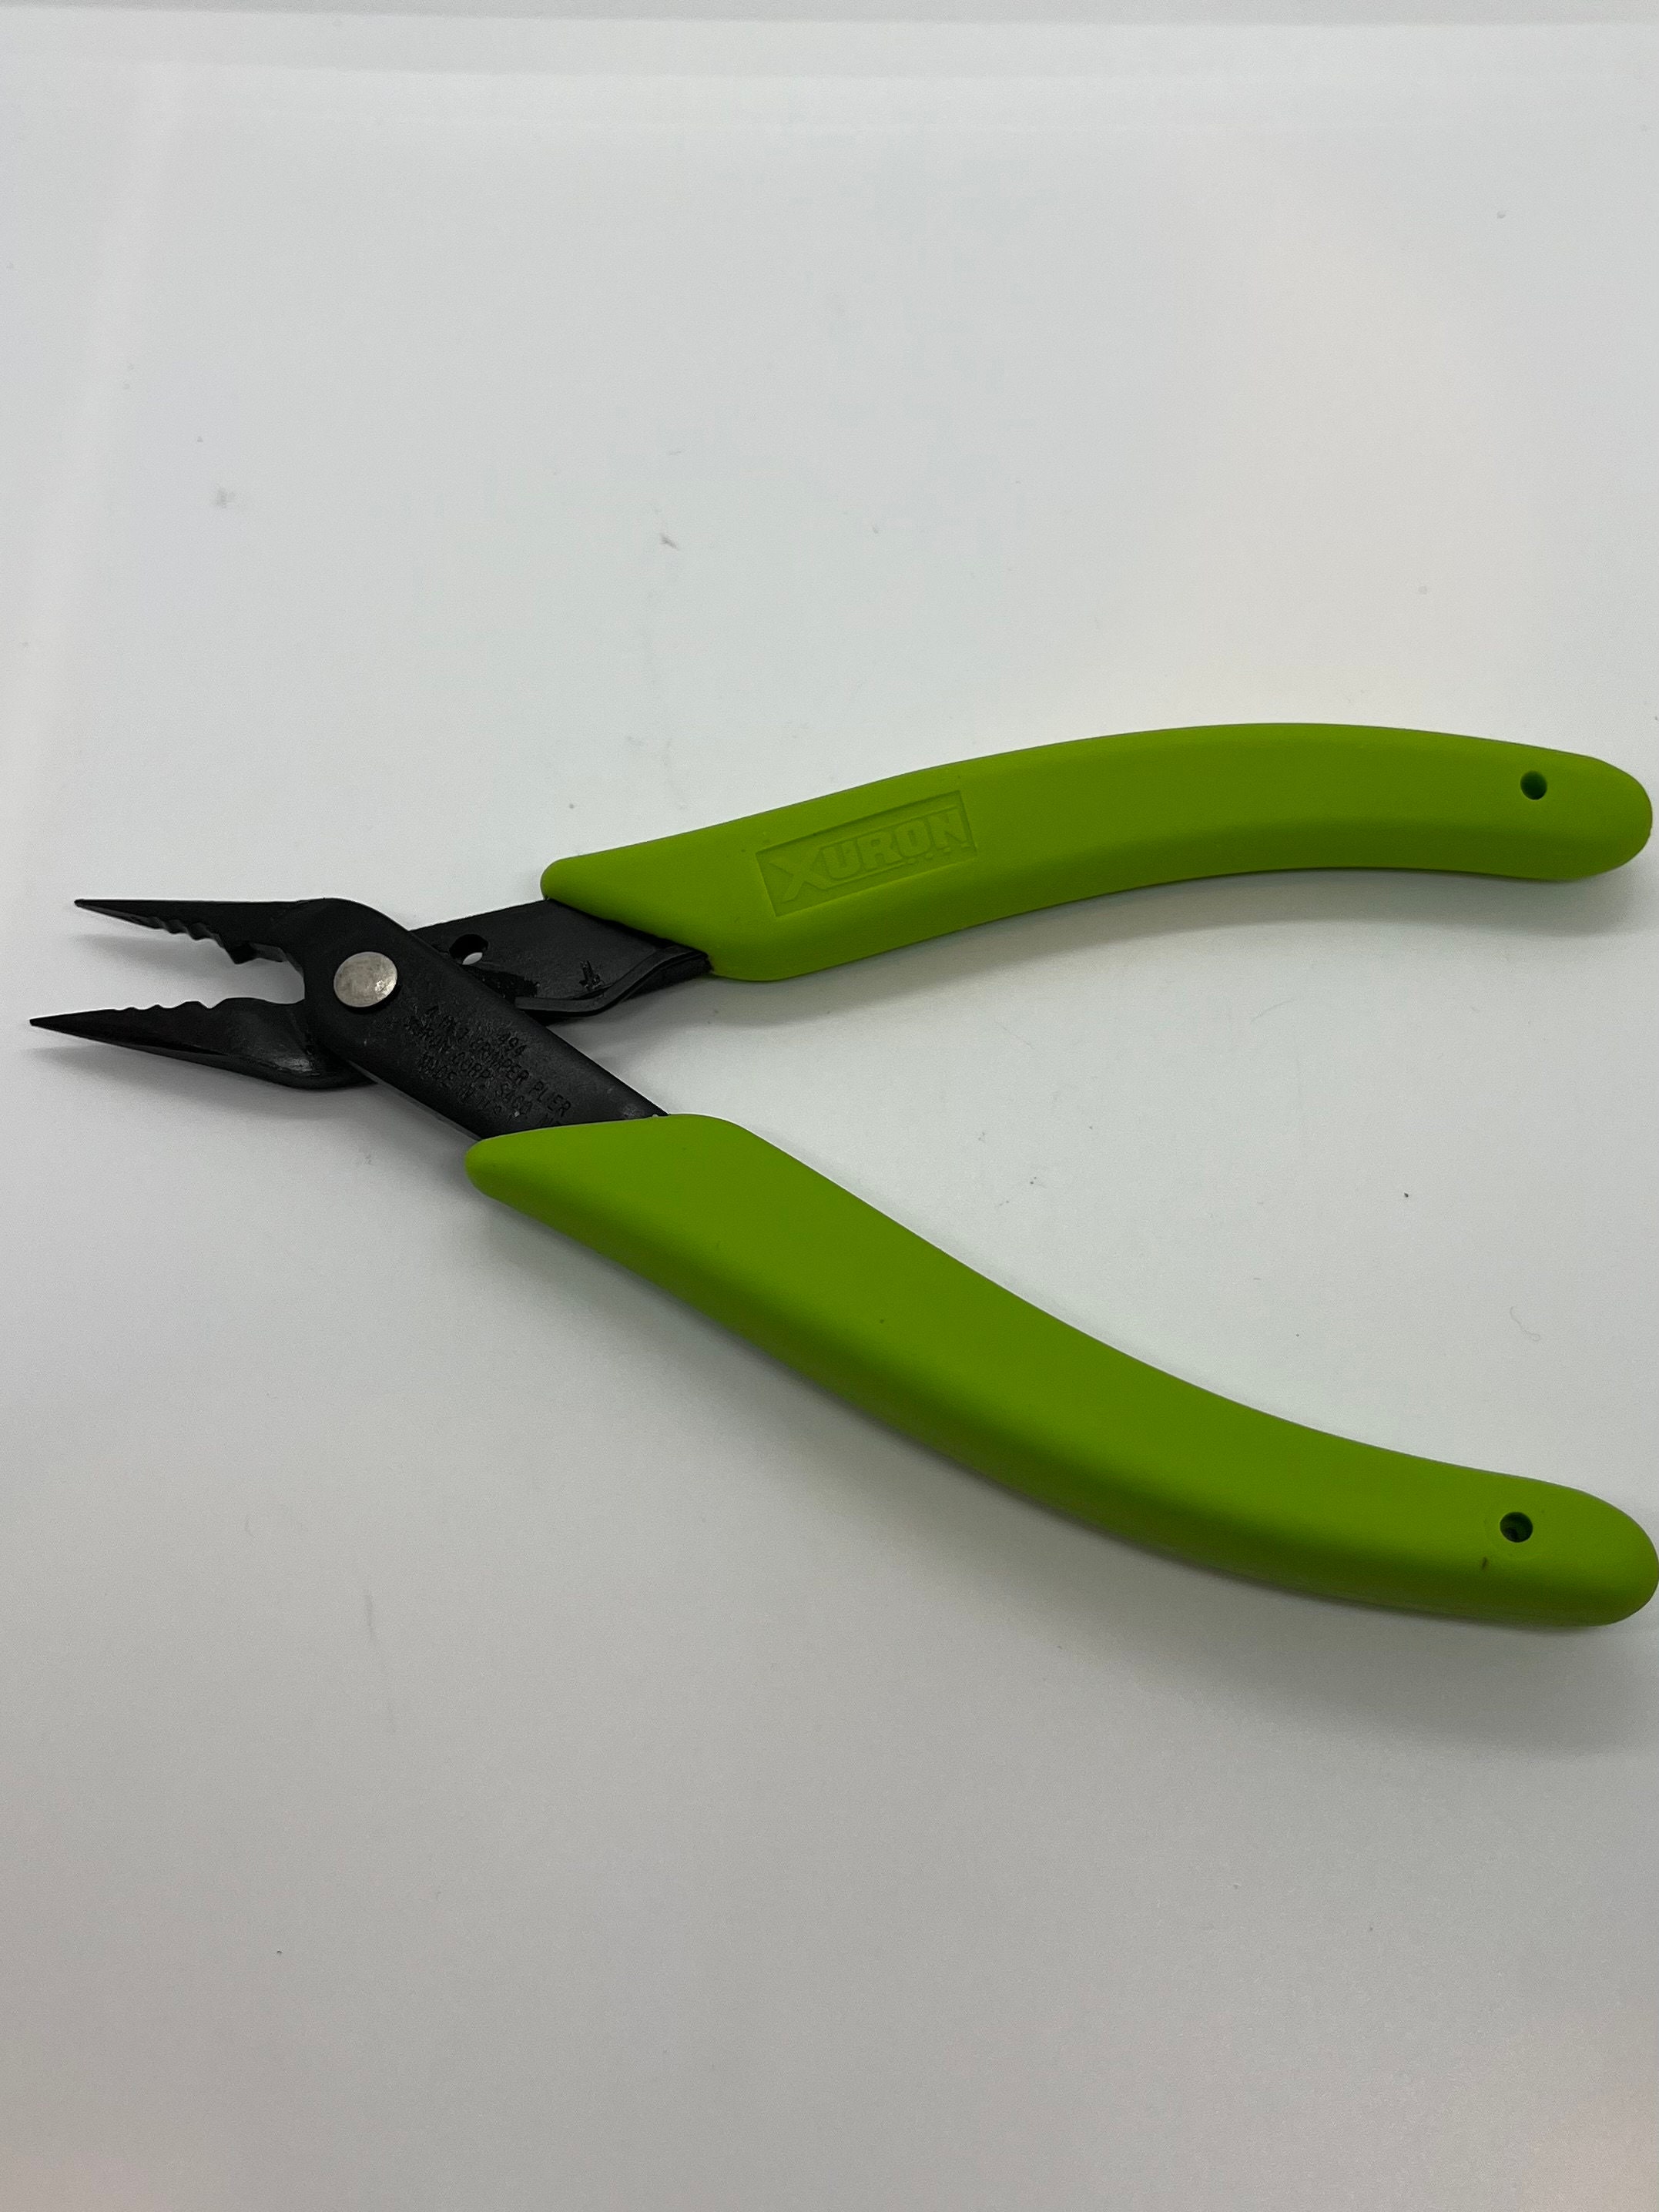 Xuron Hard, Memory, Shank Cutter Pliers Made In The USA